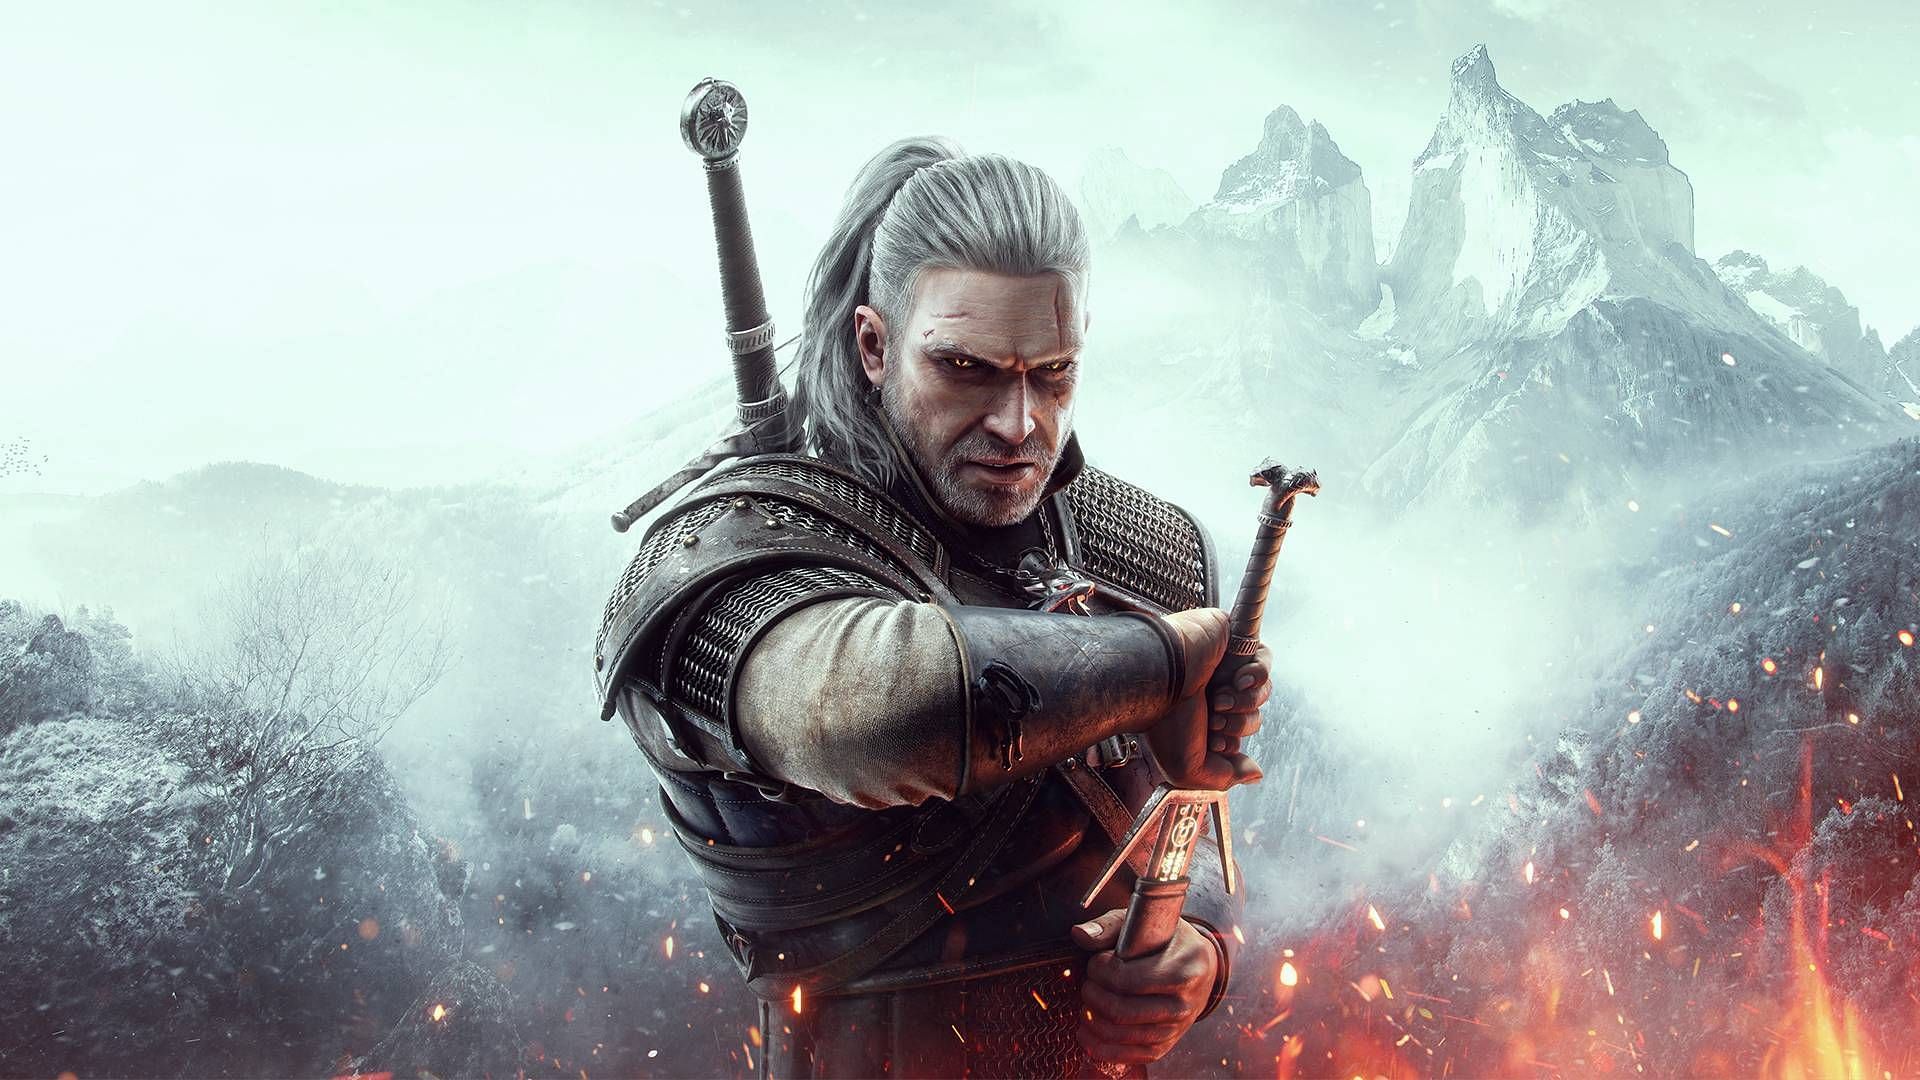 More information will be available as development gets underway for The Witcher 4 (Image via CD Projekt RED)